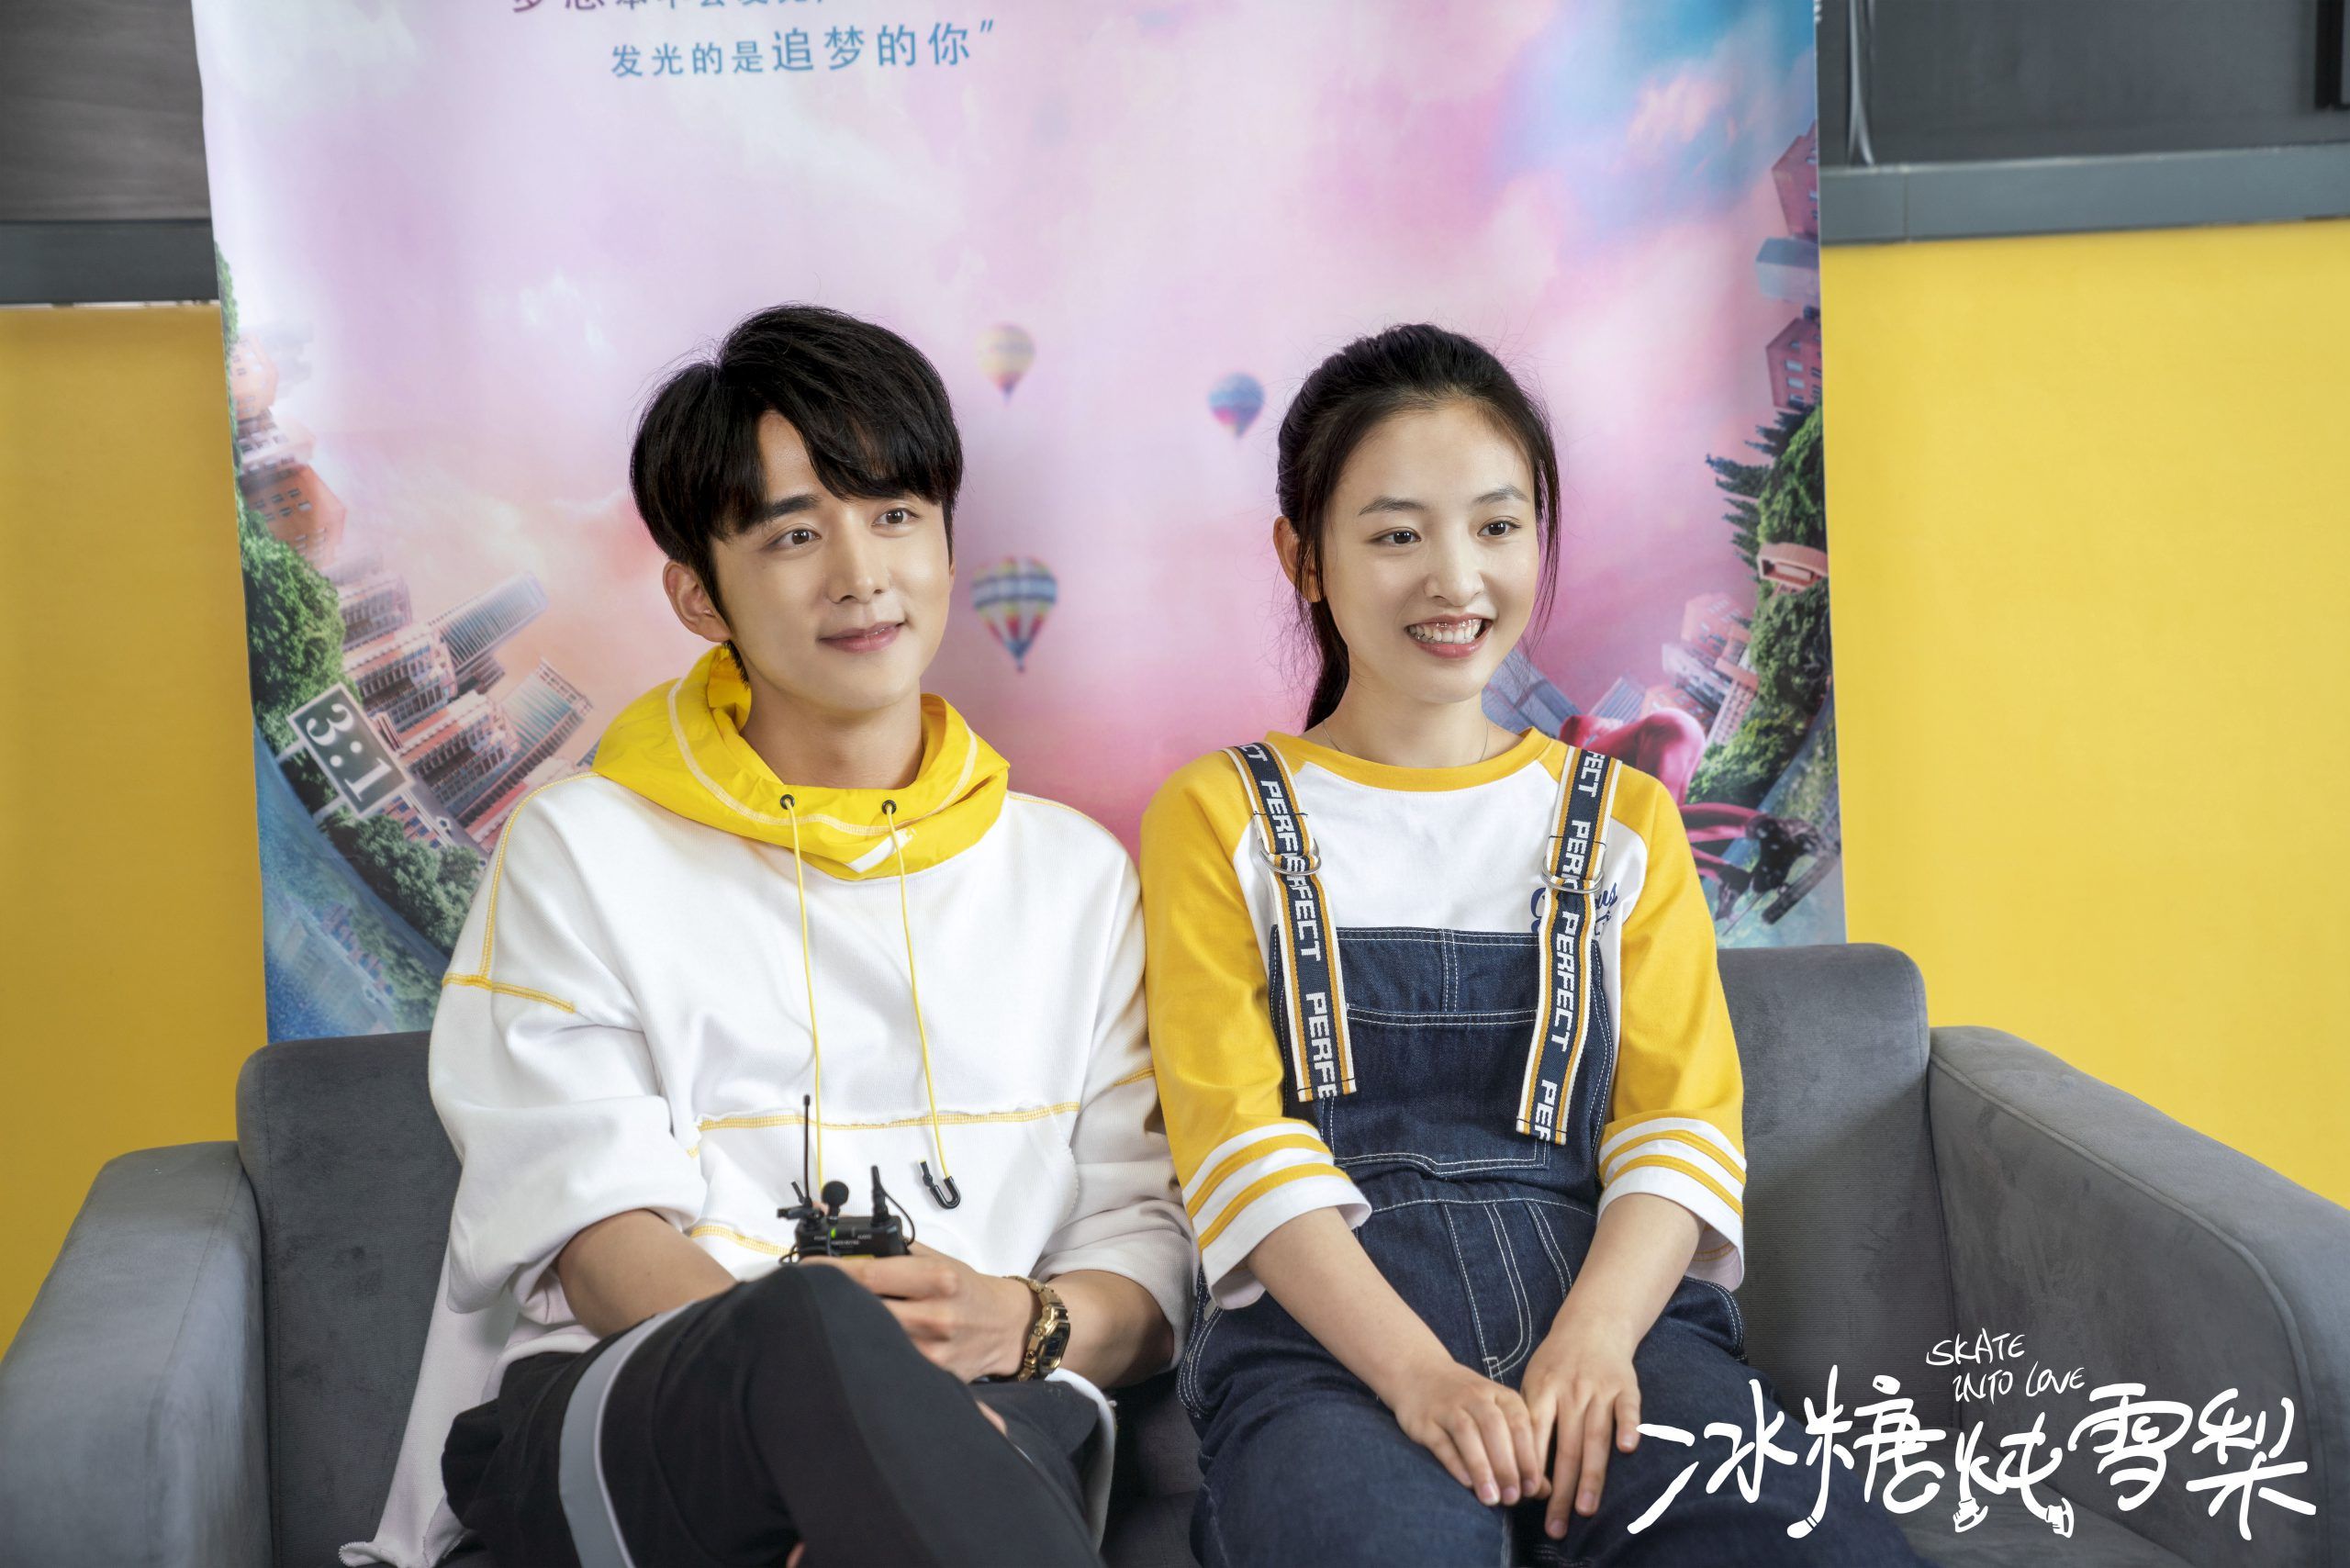 Deng Lun and Olympic Gold Medalist Wu Dajing Cameo in the “Skate